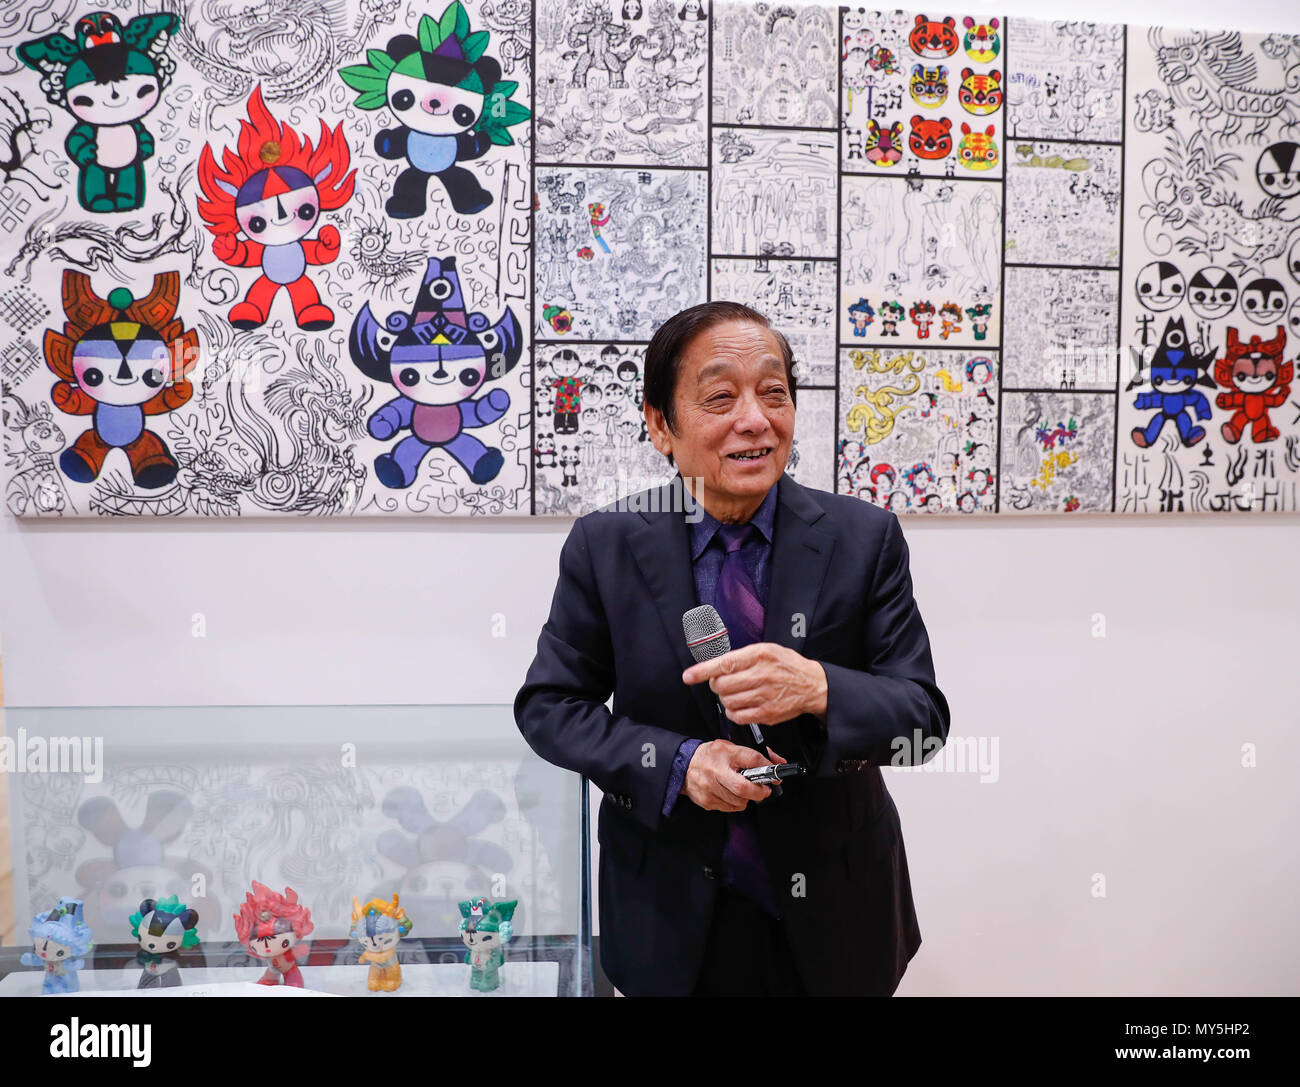 Seoul, South Korea. 5th June, 2018. Chinese artist Han Meilin introduces his most famous creations, the Fuwa ('good-luck doll') mascots which debuted at the 2008 Beijing Olympics, during 'the World of Meilin in Seoul' exhibition in Seoul, South Korea, June 5, 2018. 'Han Meilin Global Tour Exhibitions--the World of Meilin in Seoul' kicked off in Seoul on Tuesday. Credit: Wang Jingqiang/Xinhua/Alamy Live News Stock Photo